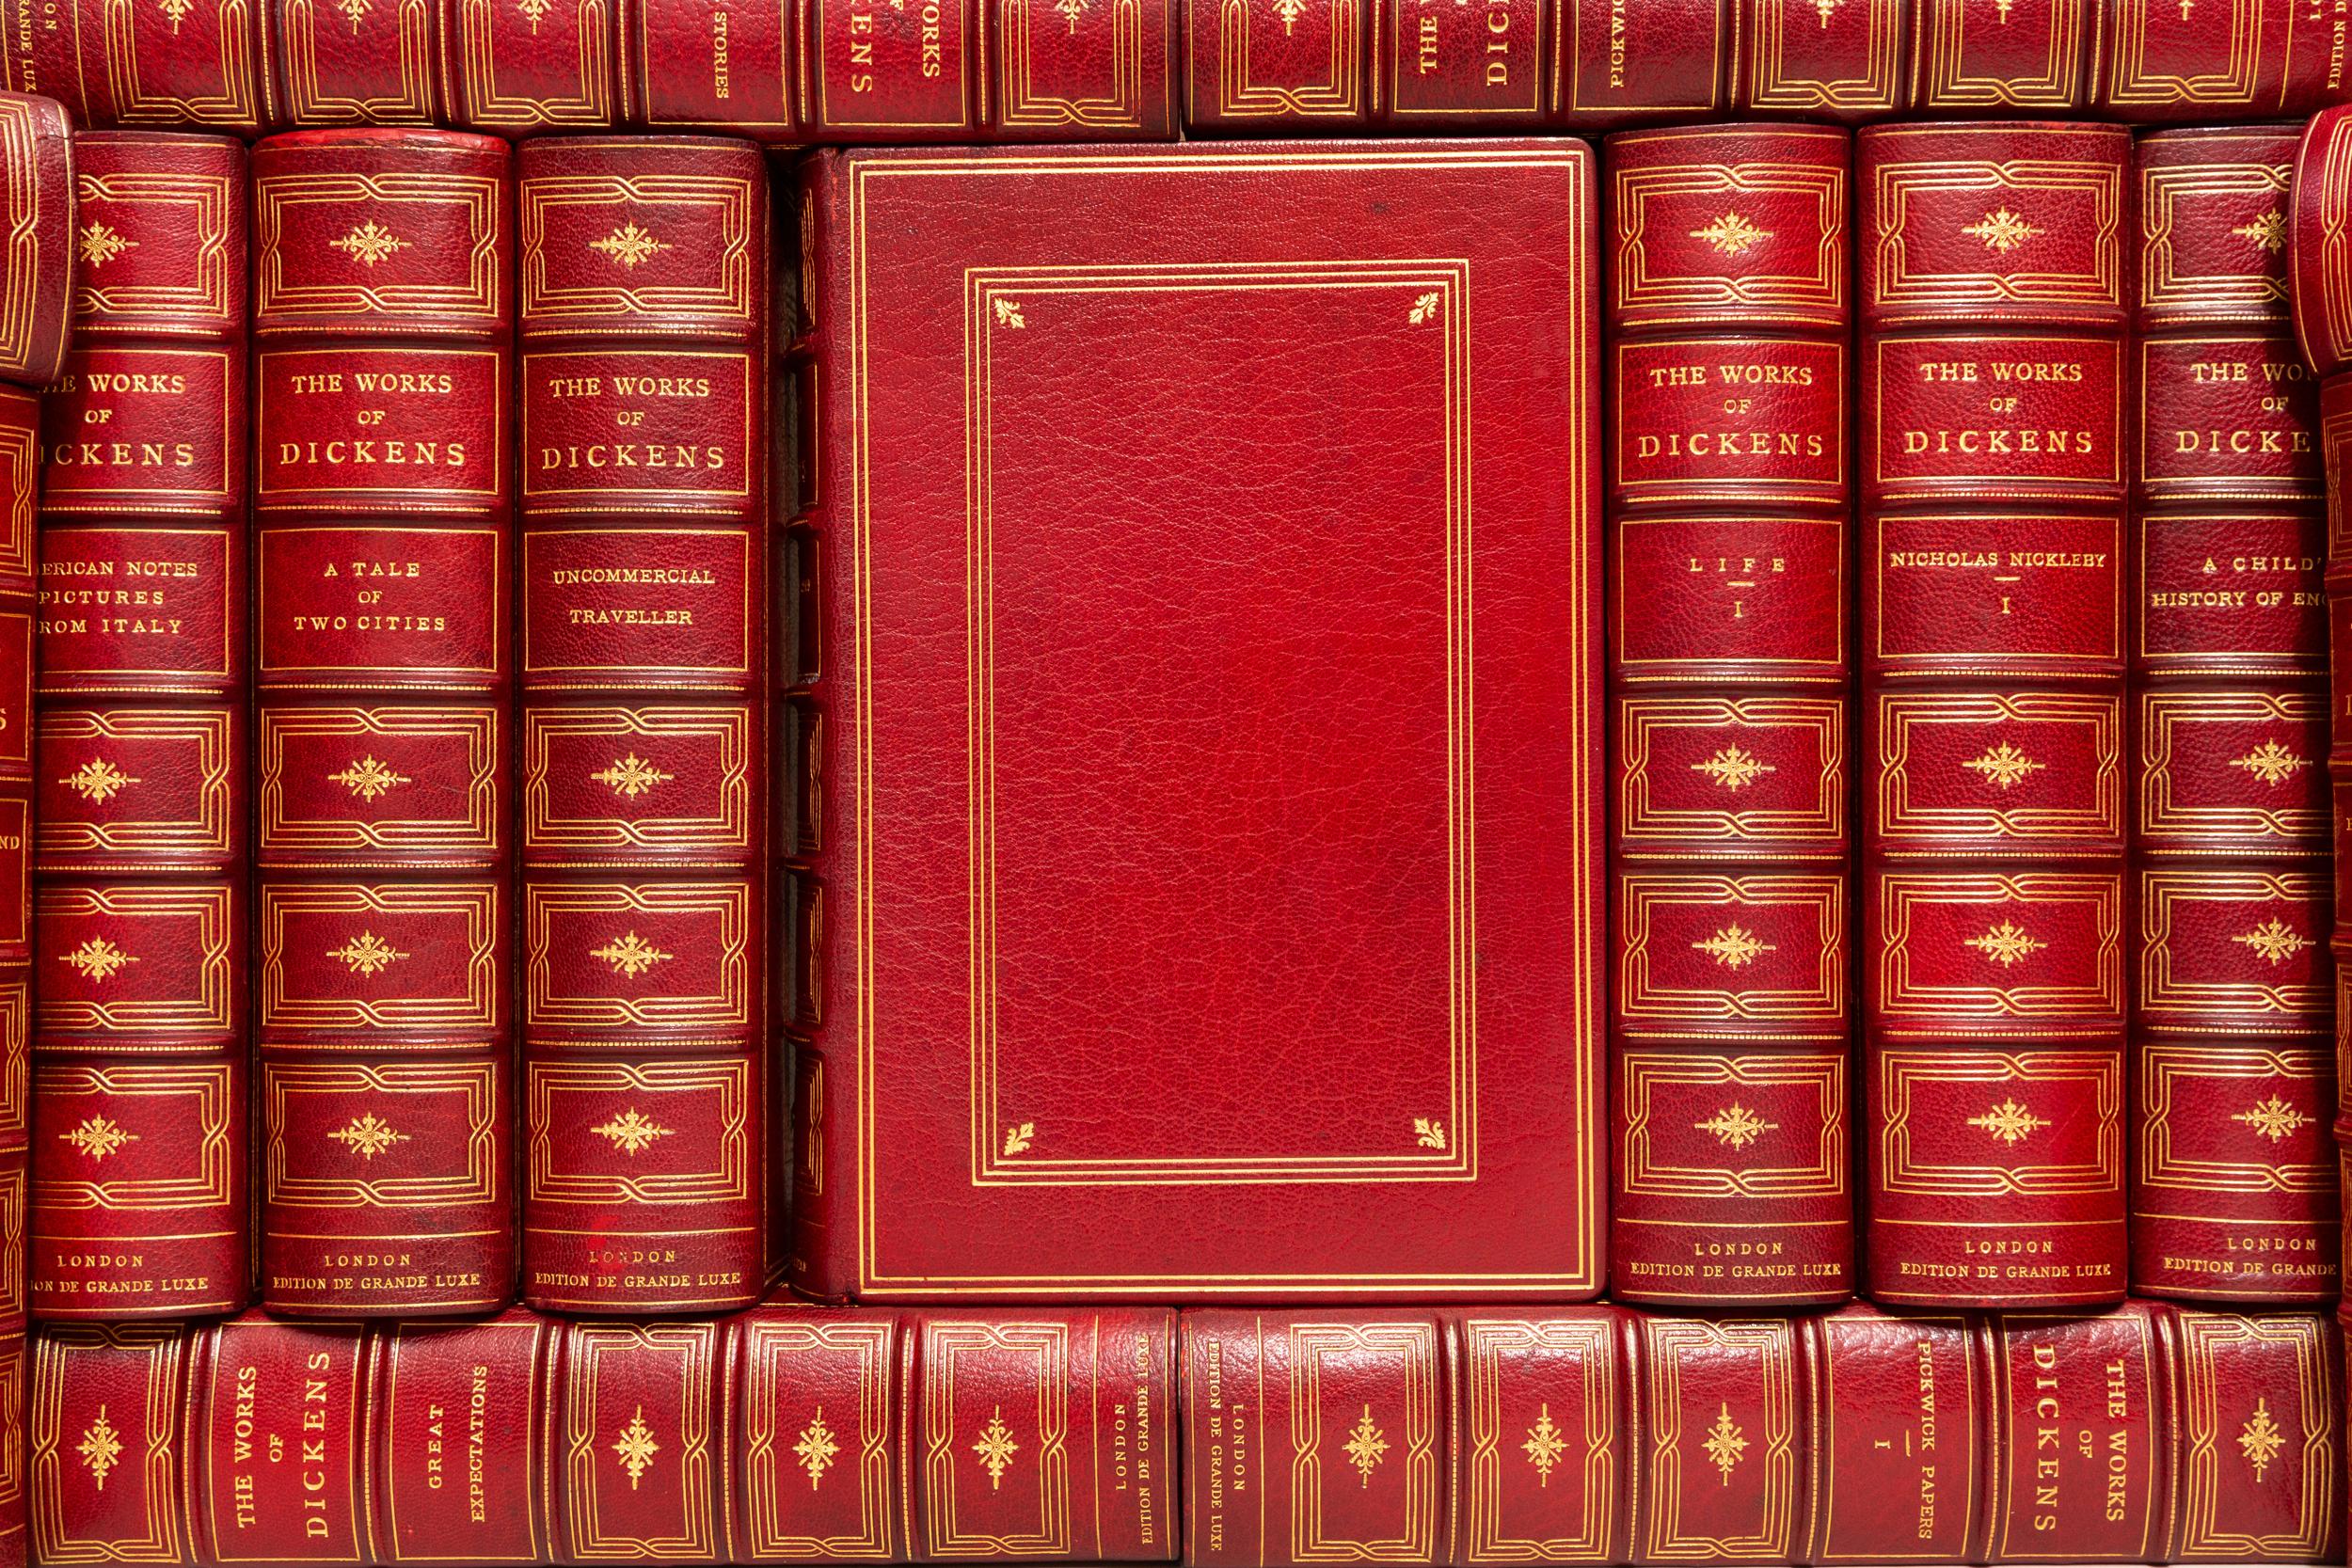 32 Volumes. Charles Dickens, The Works of Charles Dickens. Bound in full red morocco. Gilt-tooling on covers. Raised bands. All edges gilt. Decorative gilt emblems on spine. Marbled endpapers. Bound by Macdonald's Bindery. Limited to 500 numbered